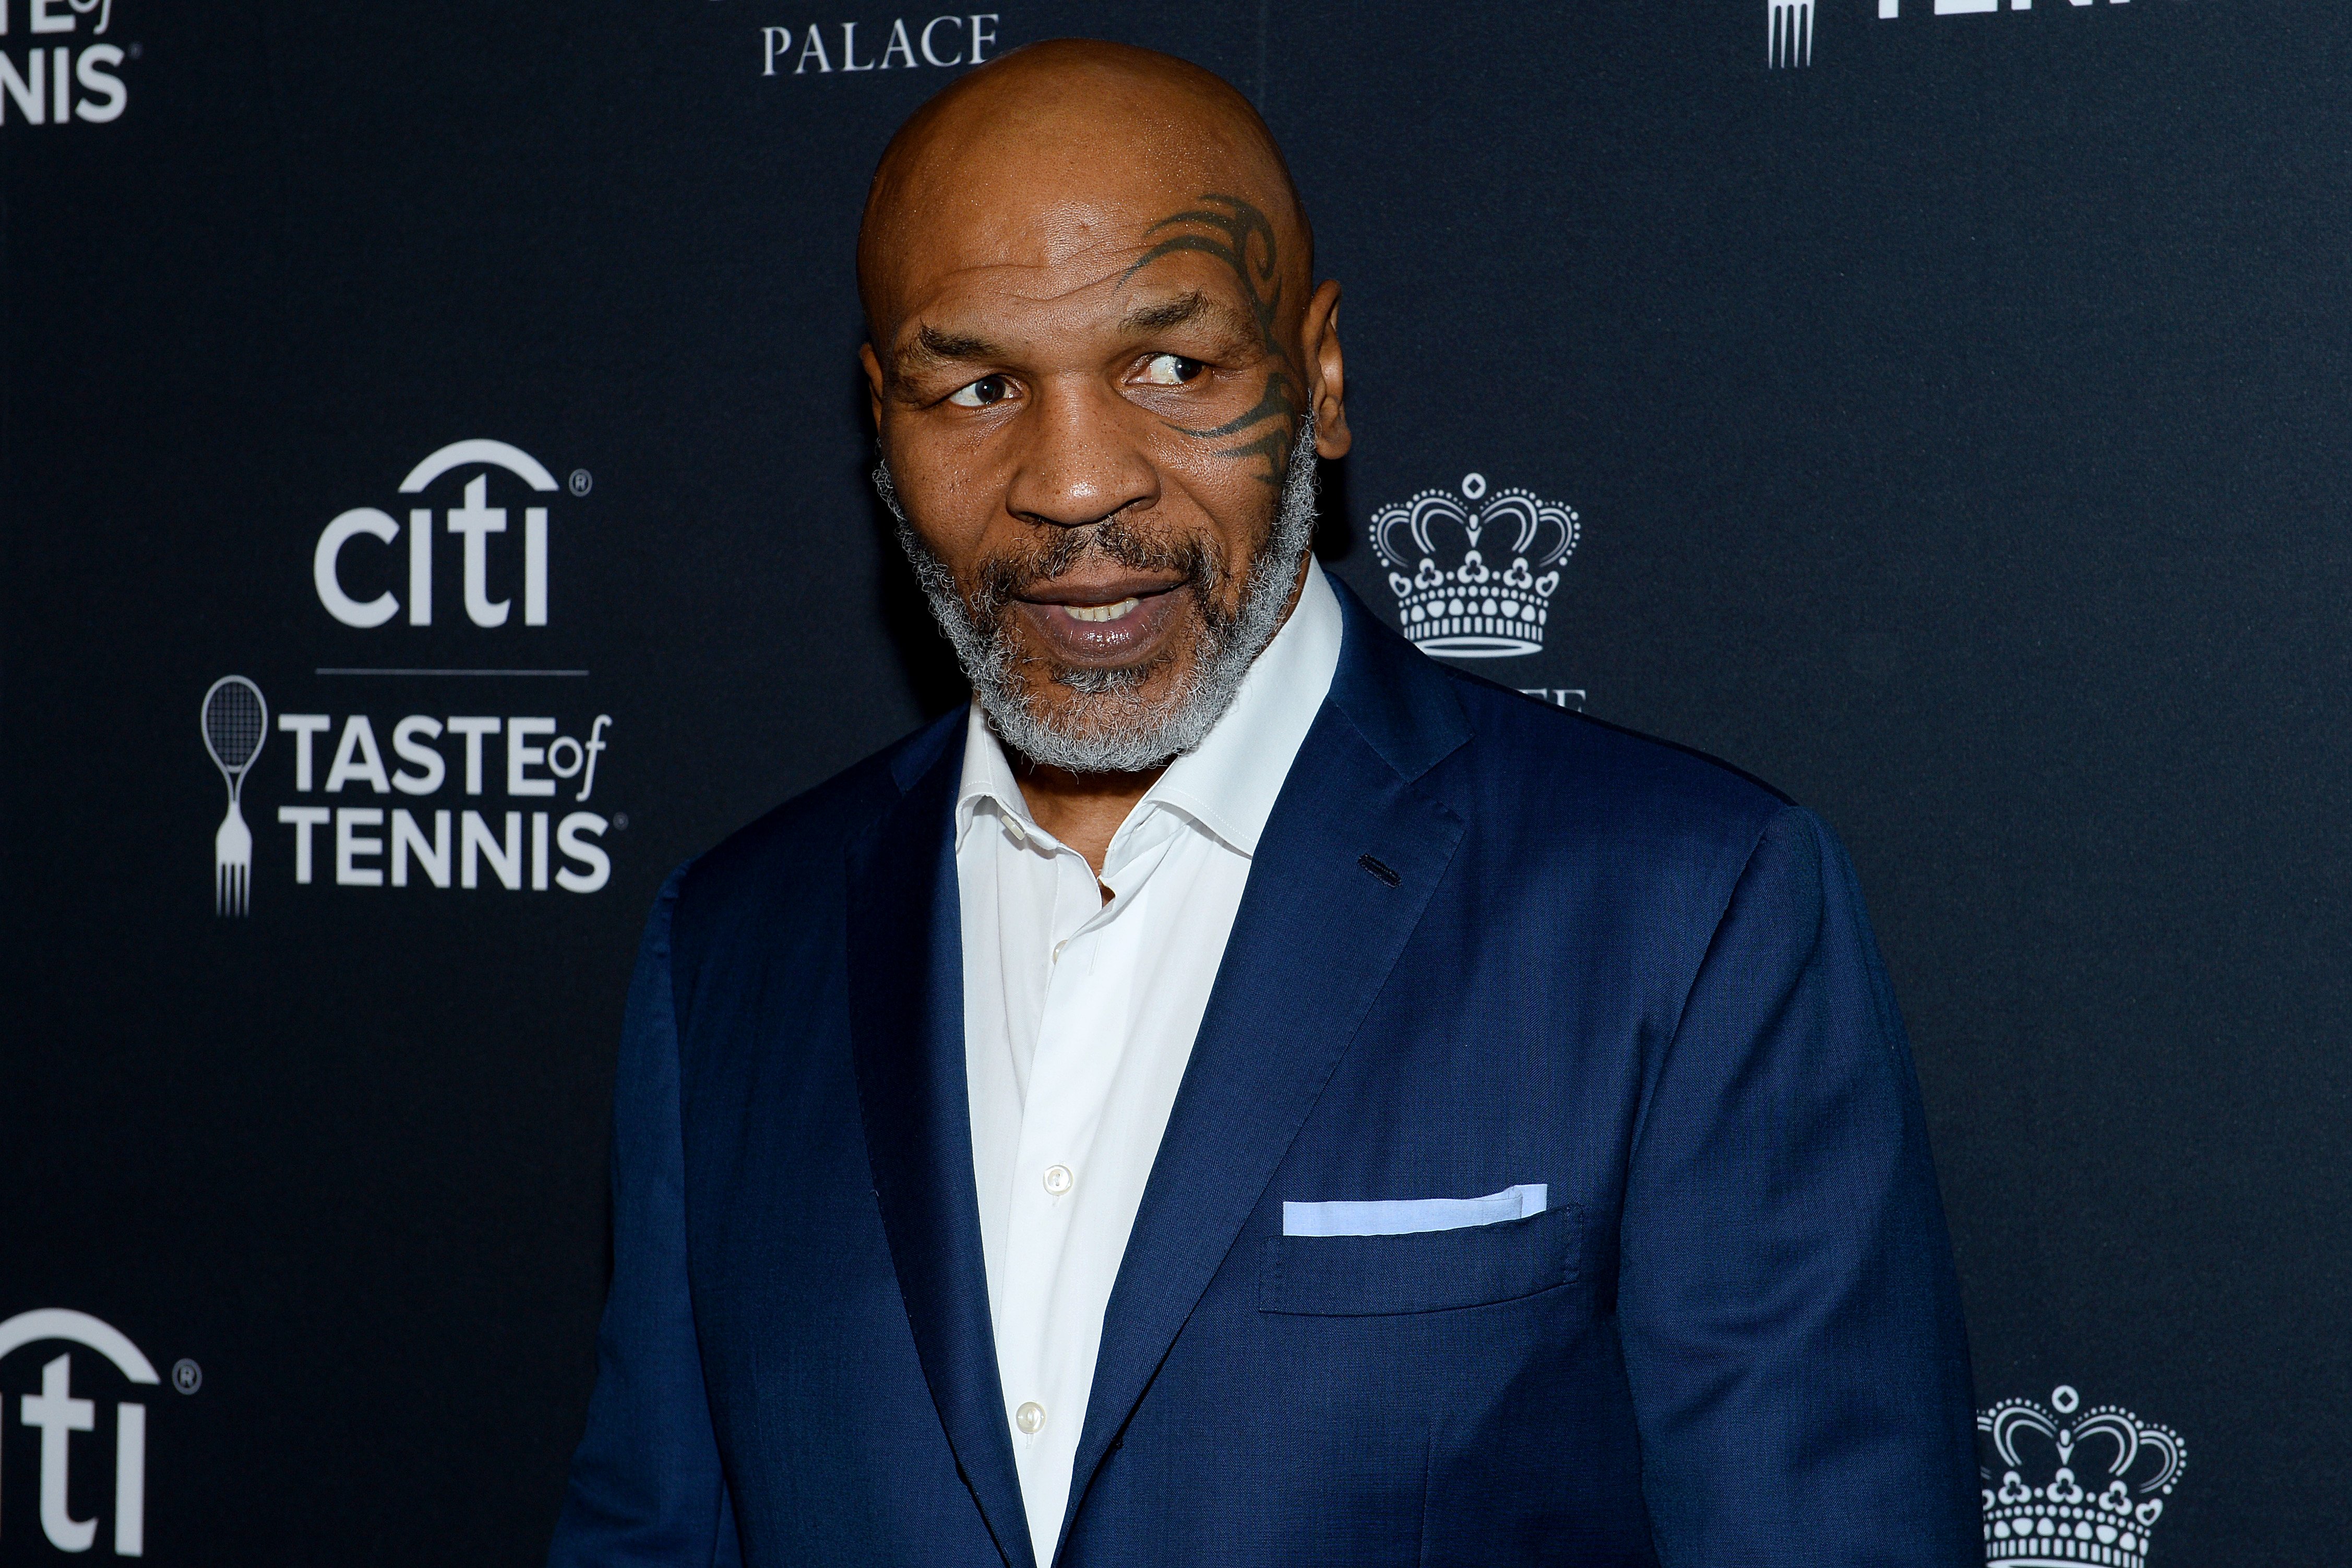 Mike Tyson attends Citi Taste of Tennis on August 22, 2019 in New York City. | Source: Getty Images